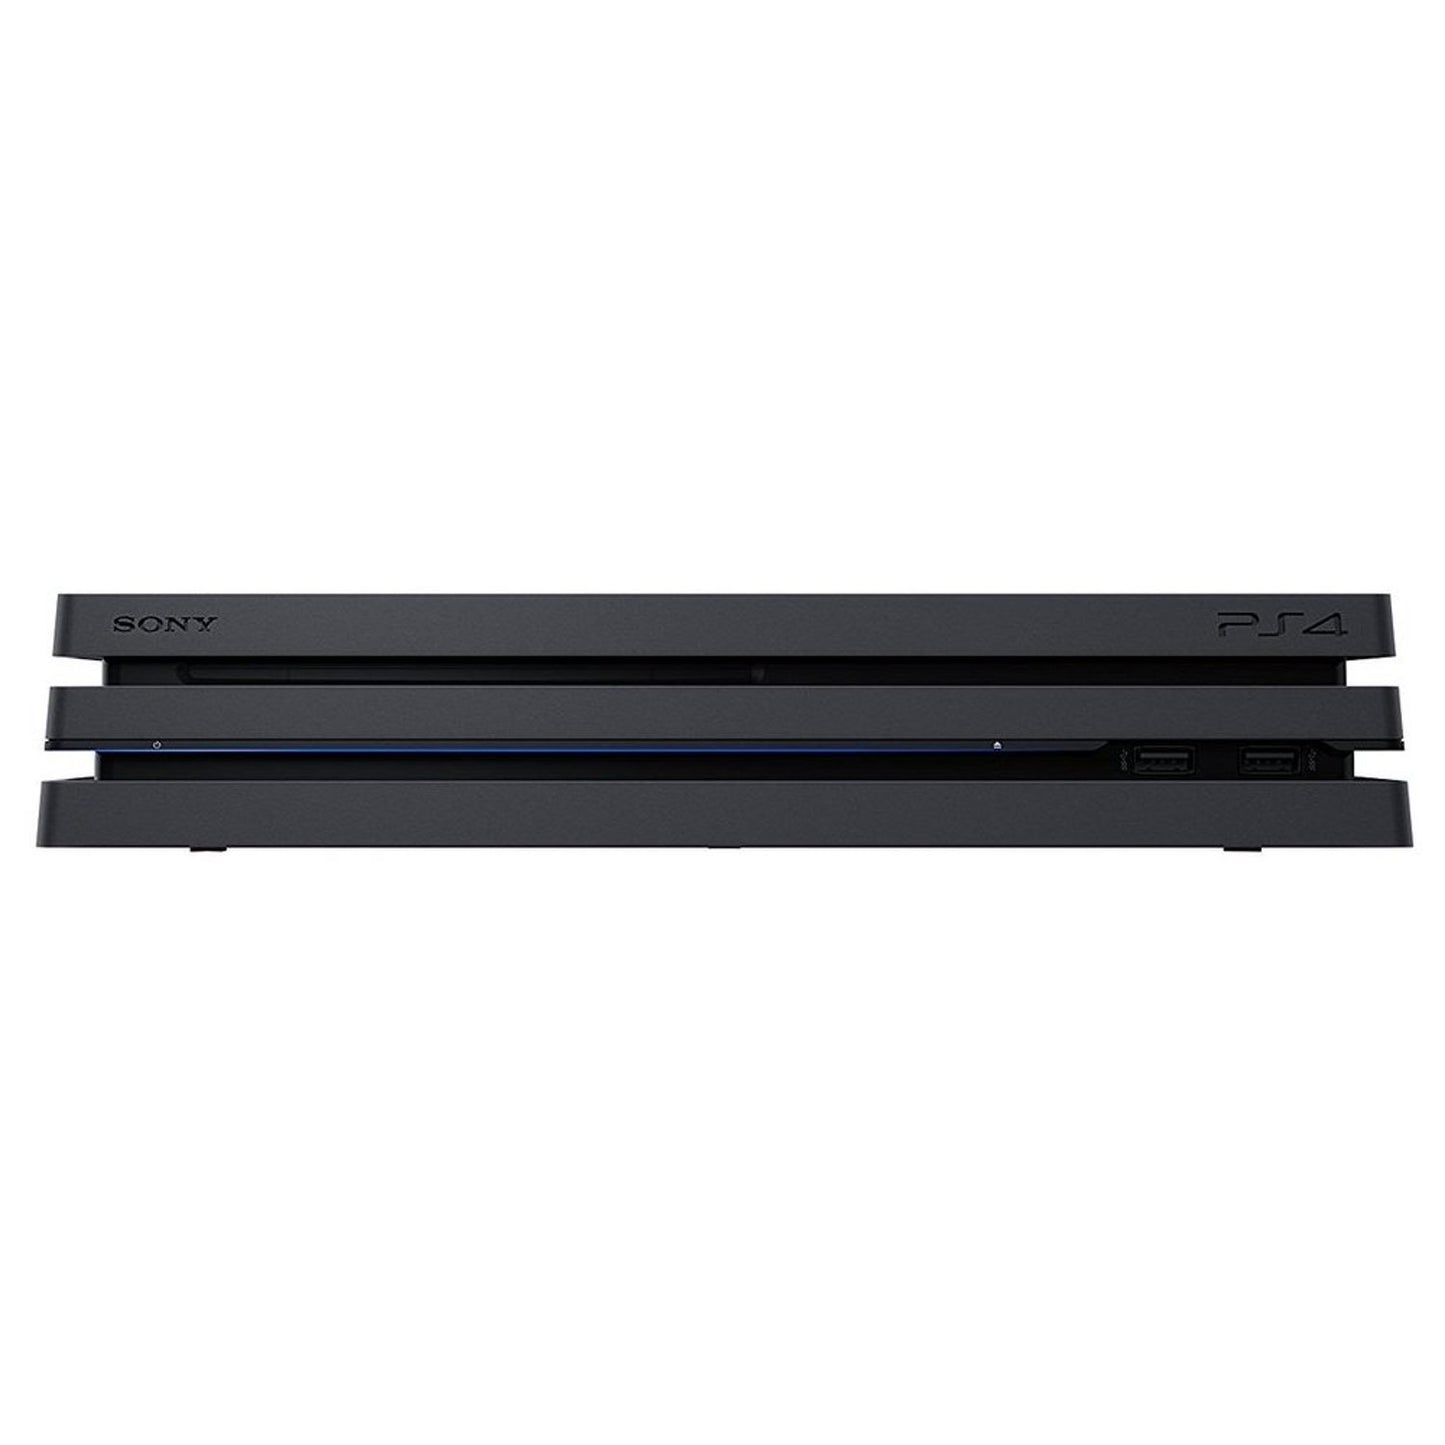 Sony PlayStation 4 Pro 1TB with One Controller